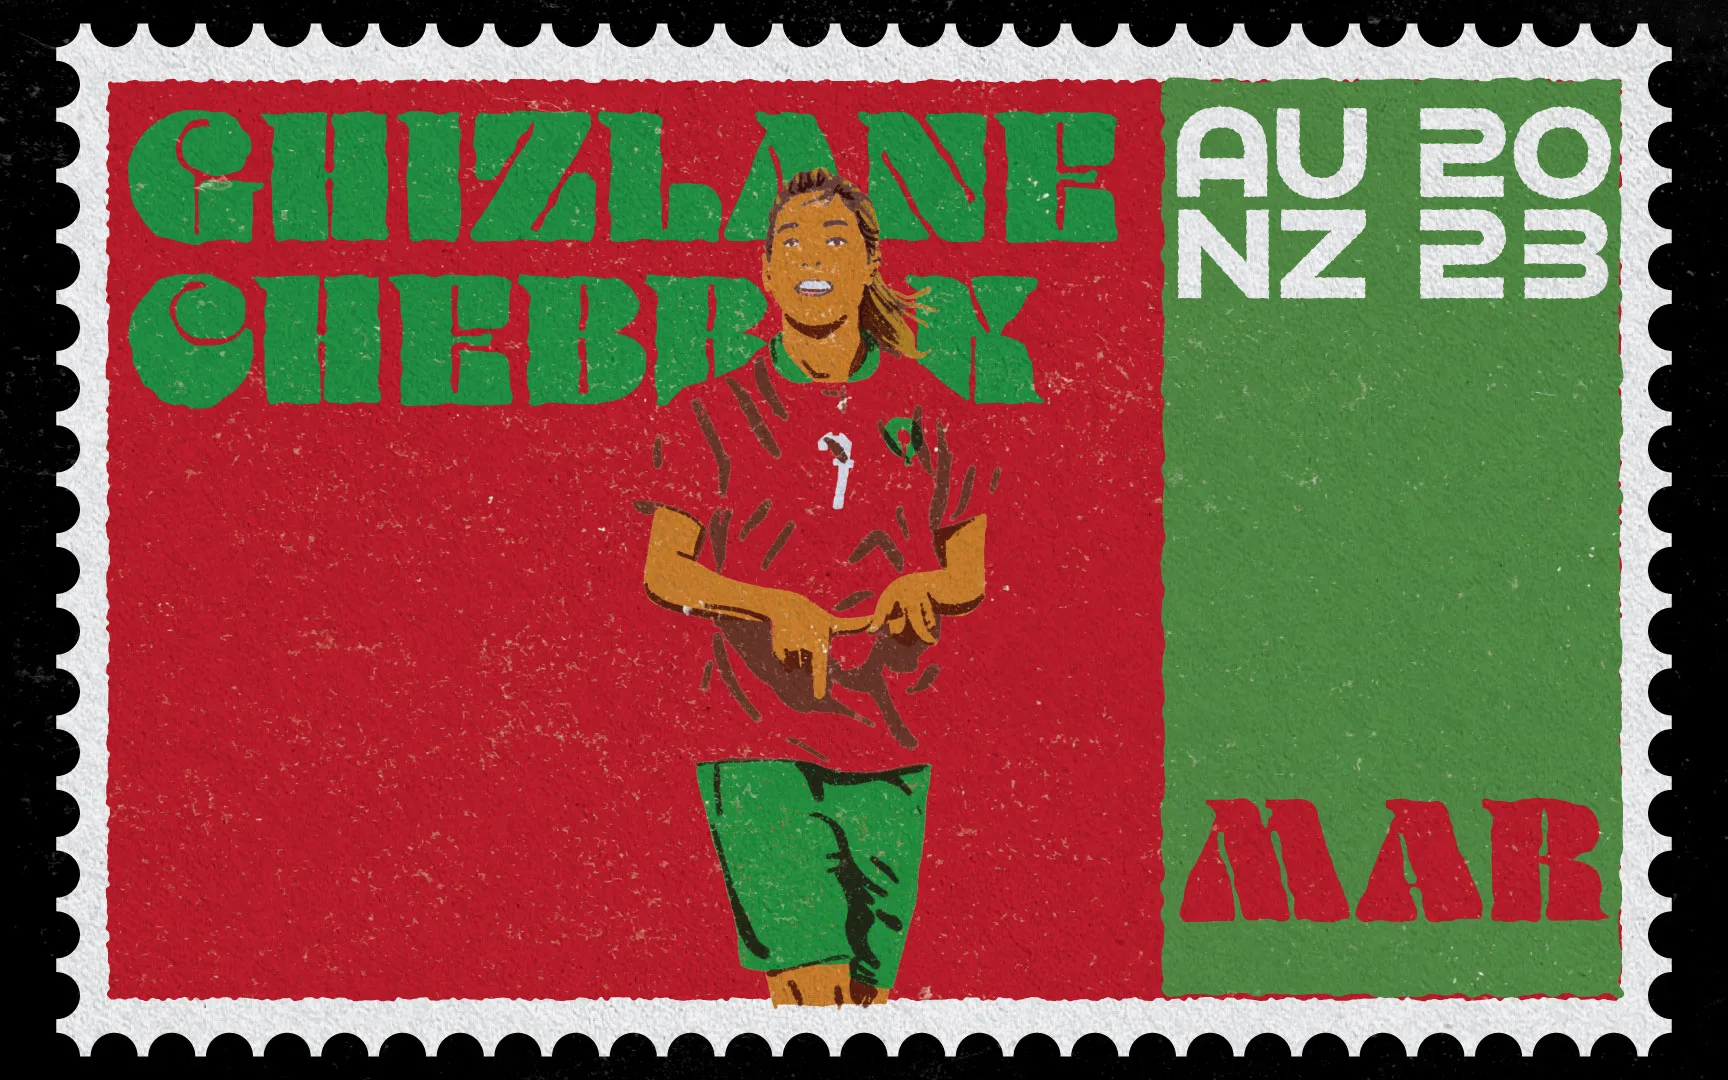 Vintage Stamp Illustration of Ghizlane Chebbak for the Women's World Cup